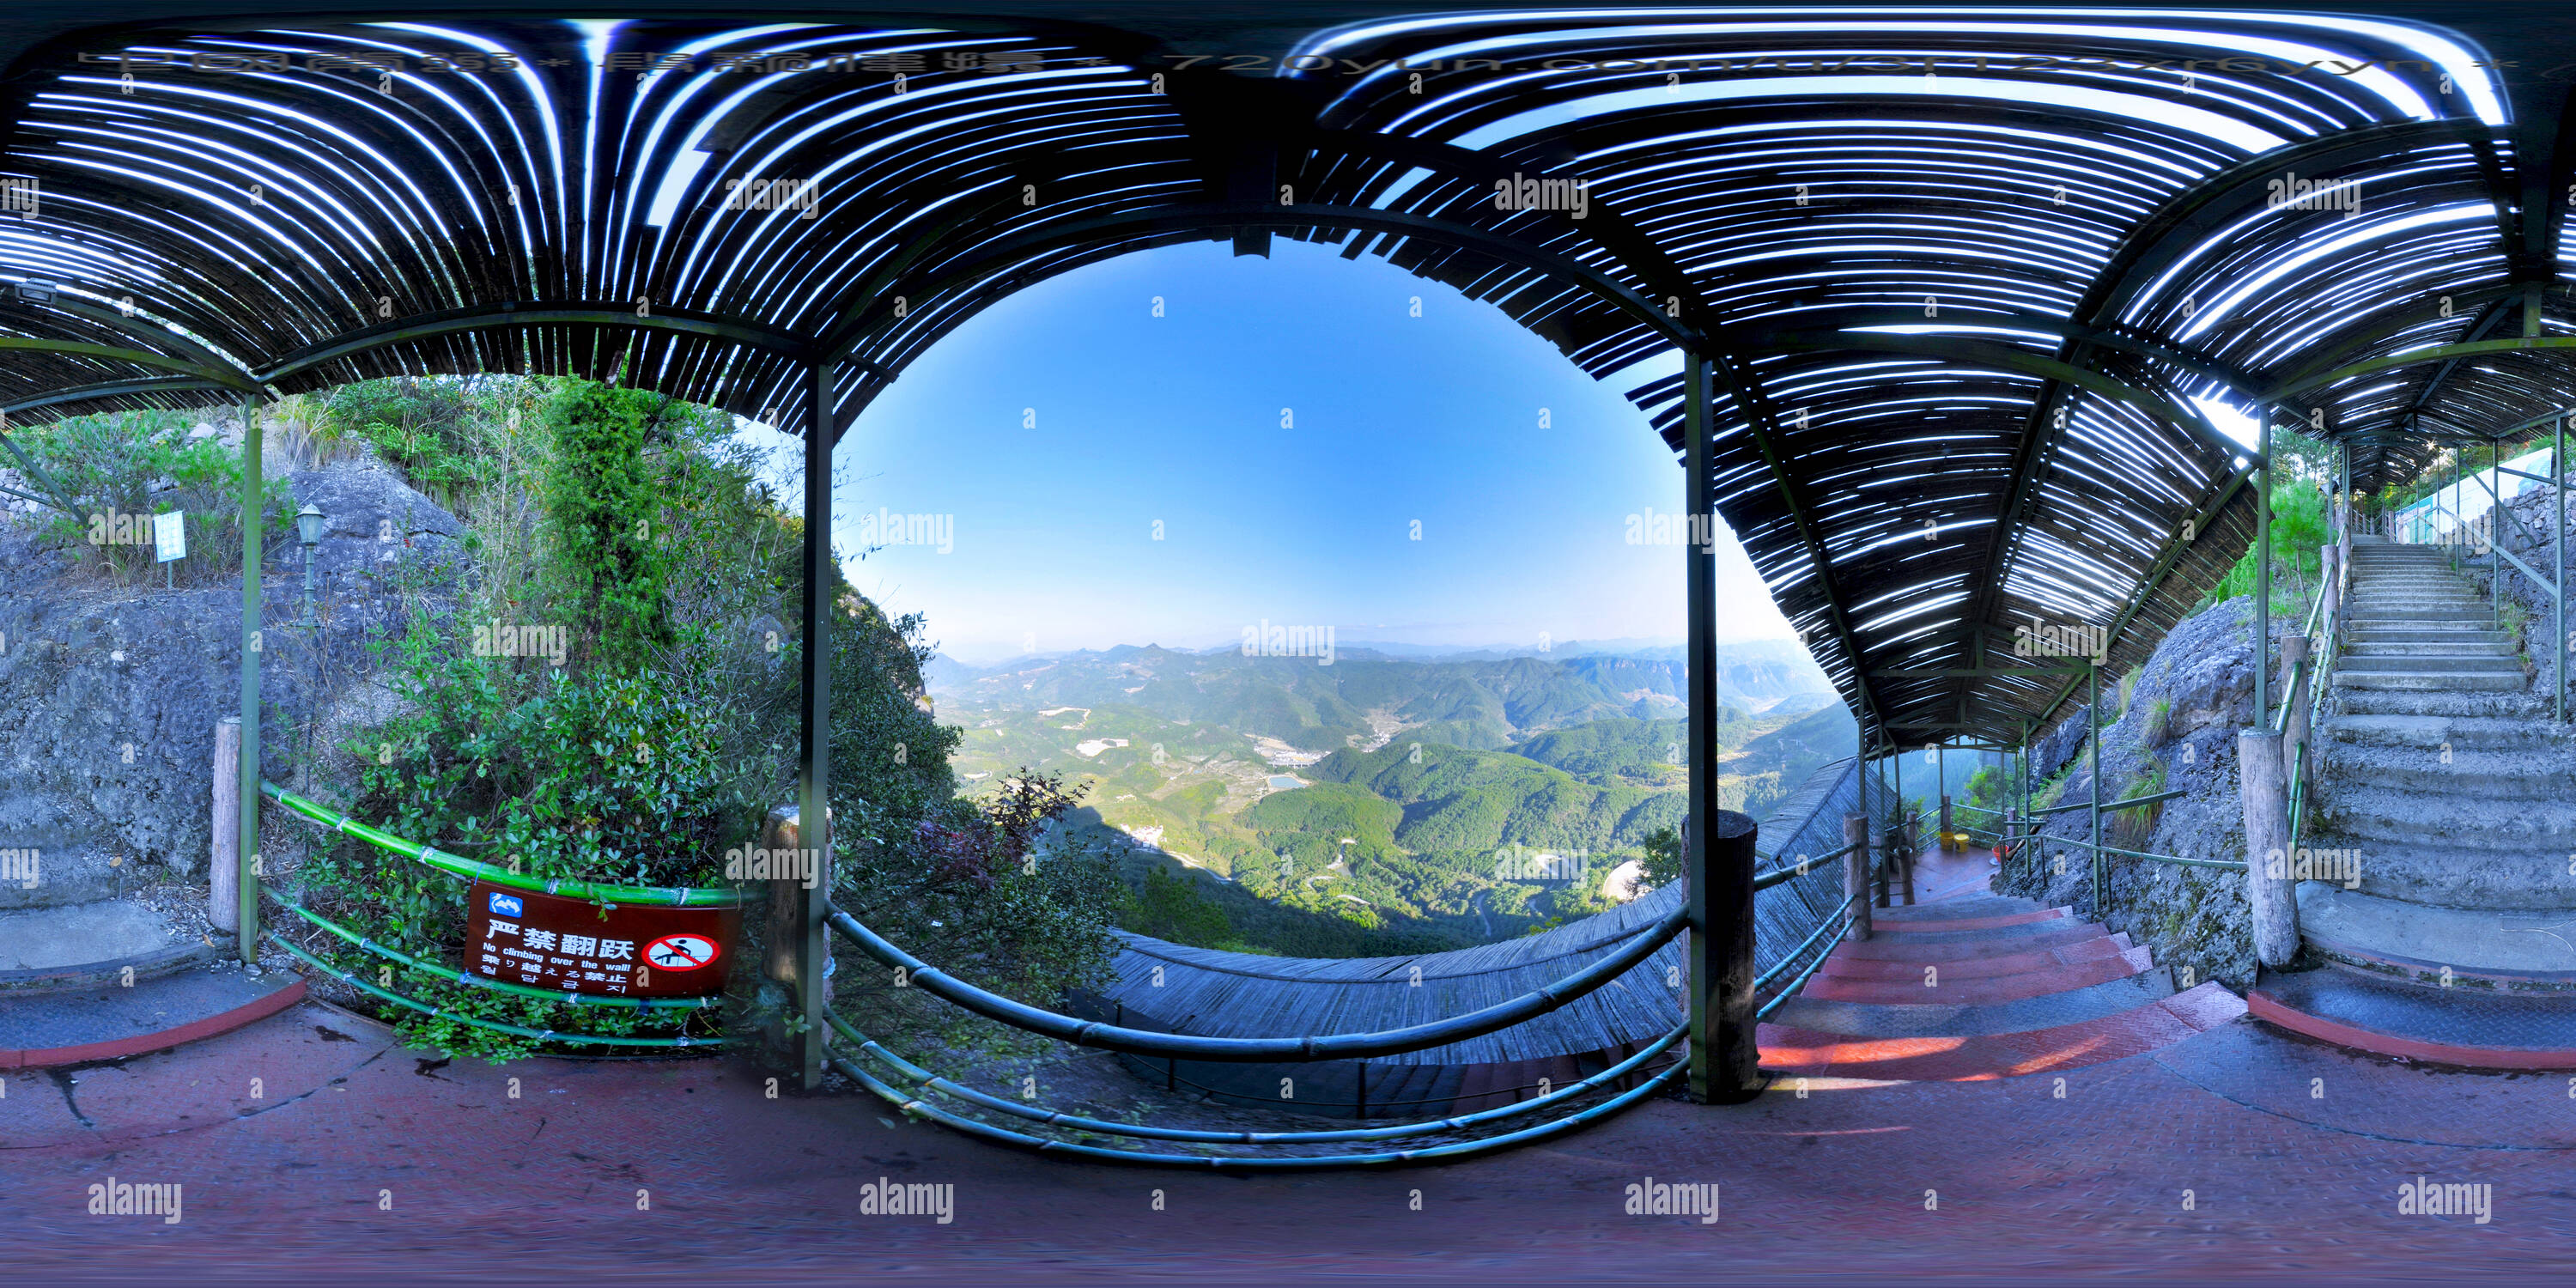 360 degree panoramic view of scaling ladder(415) 云梯